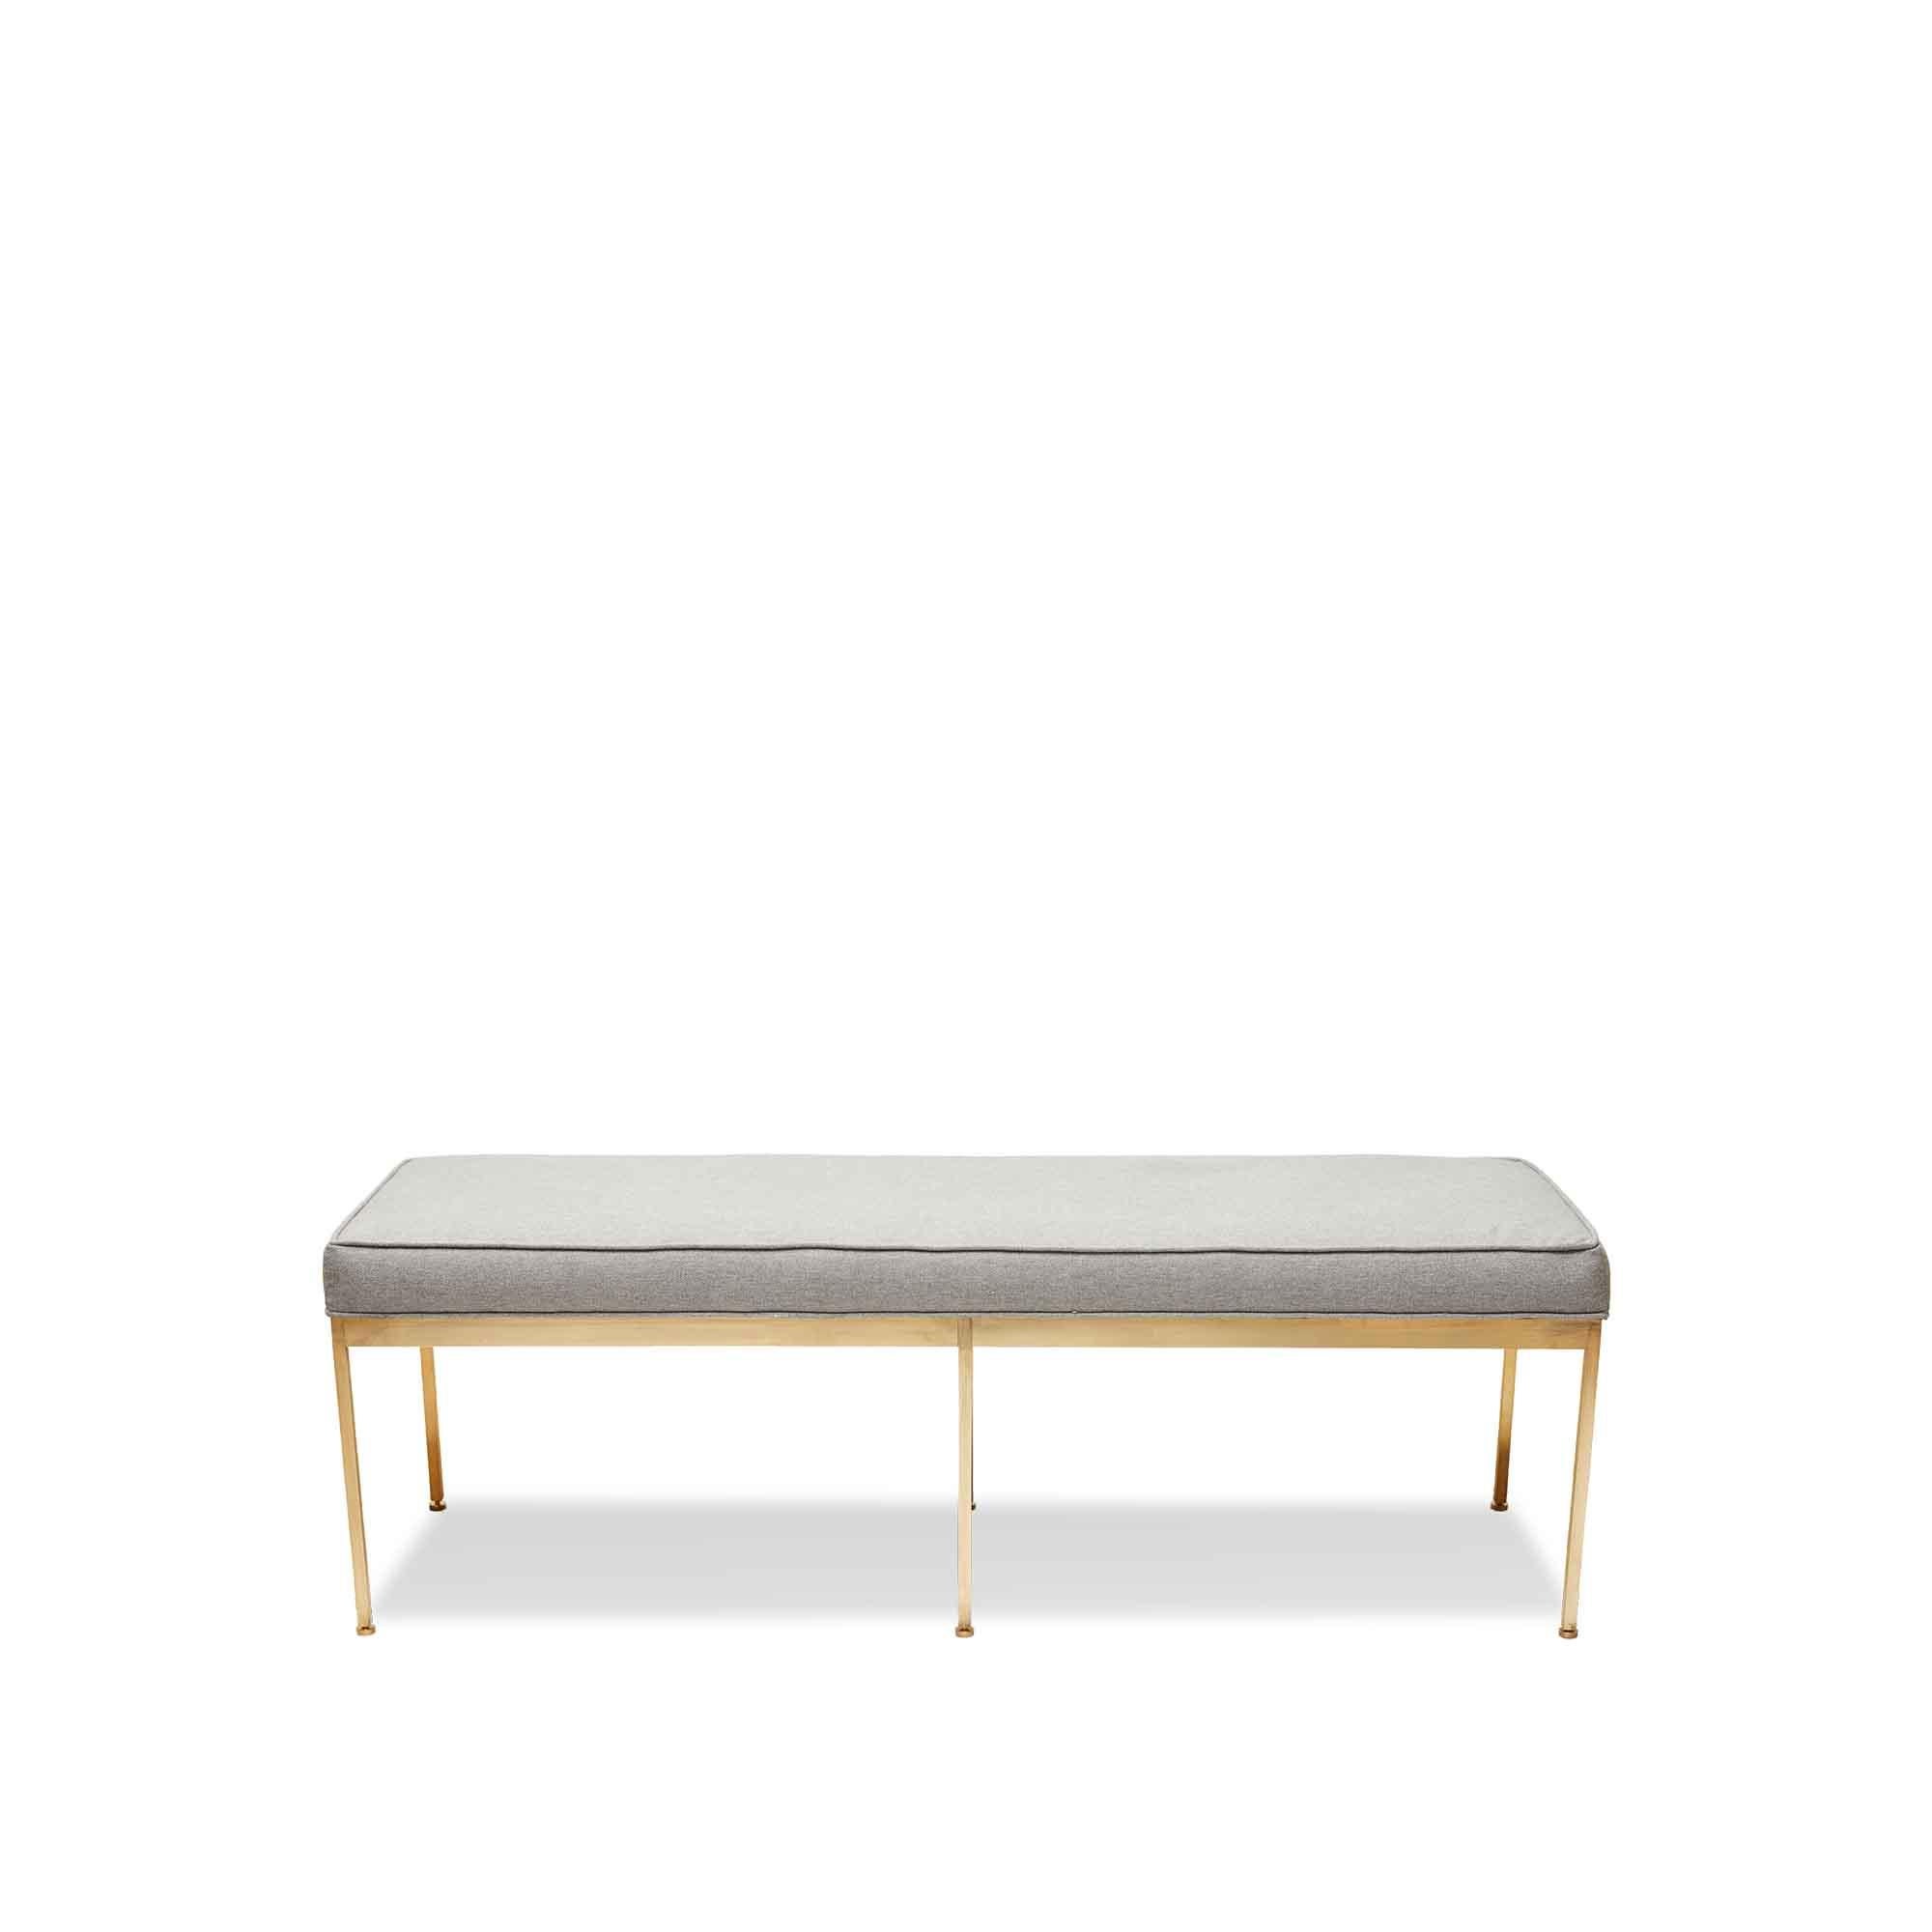 American Linen and Brass Paul Bench by Lawson-Fenning